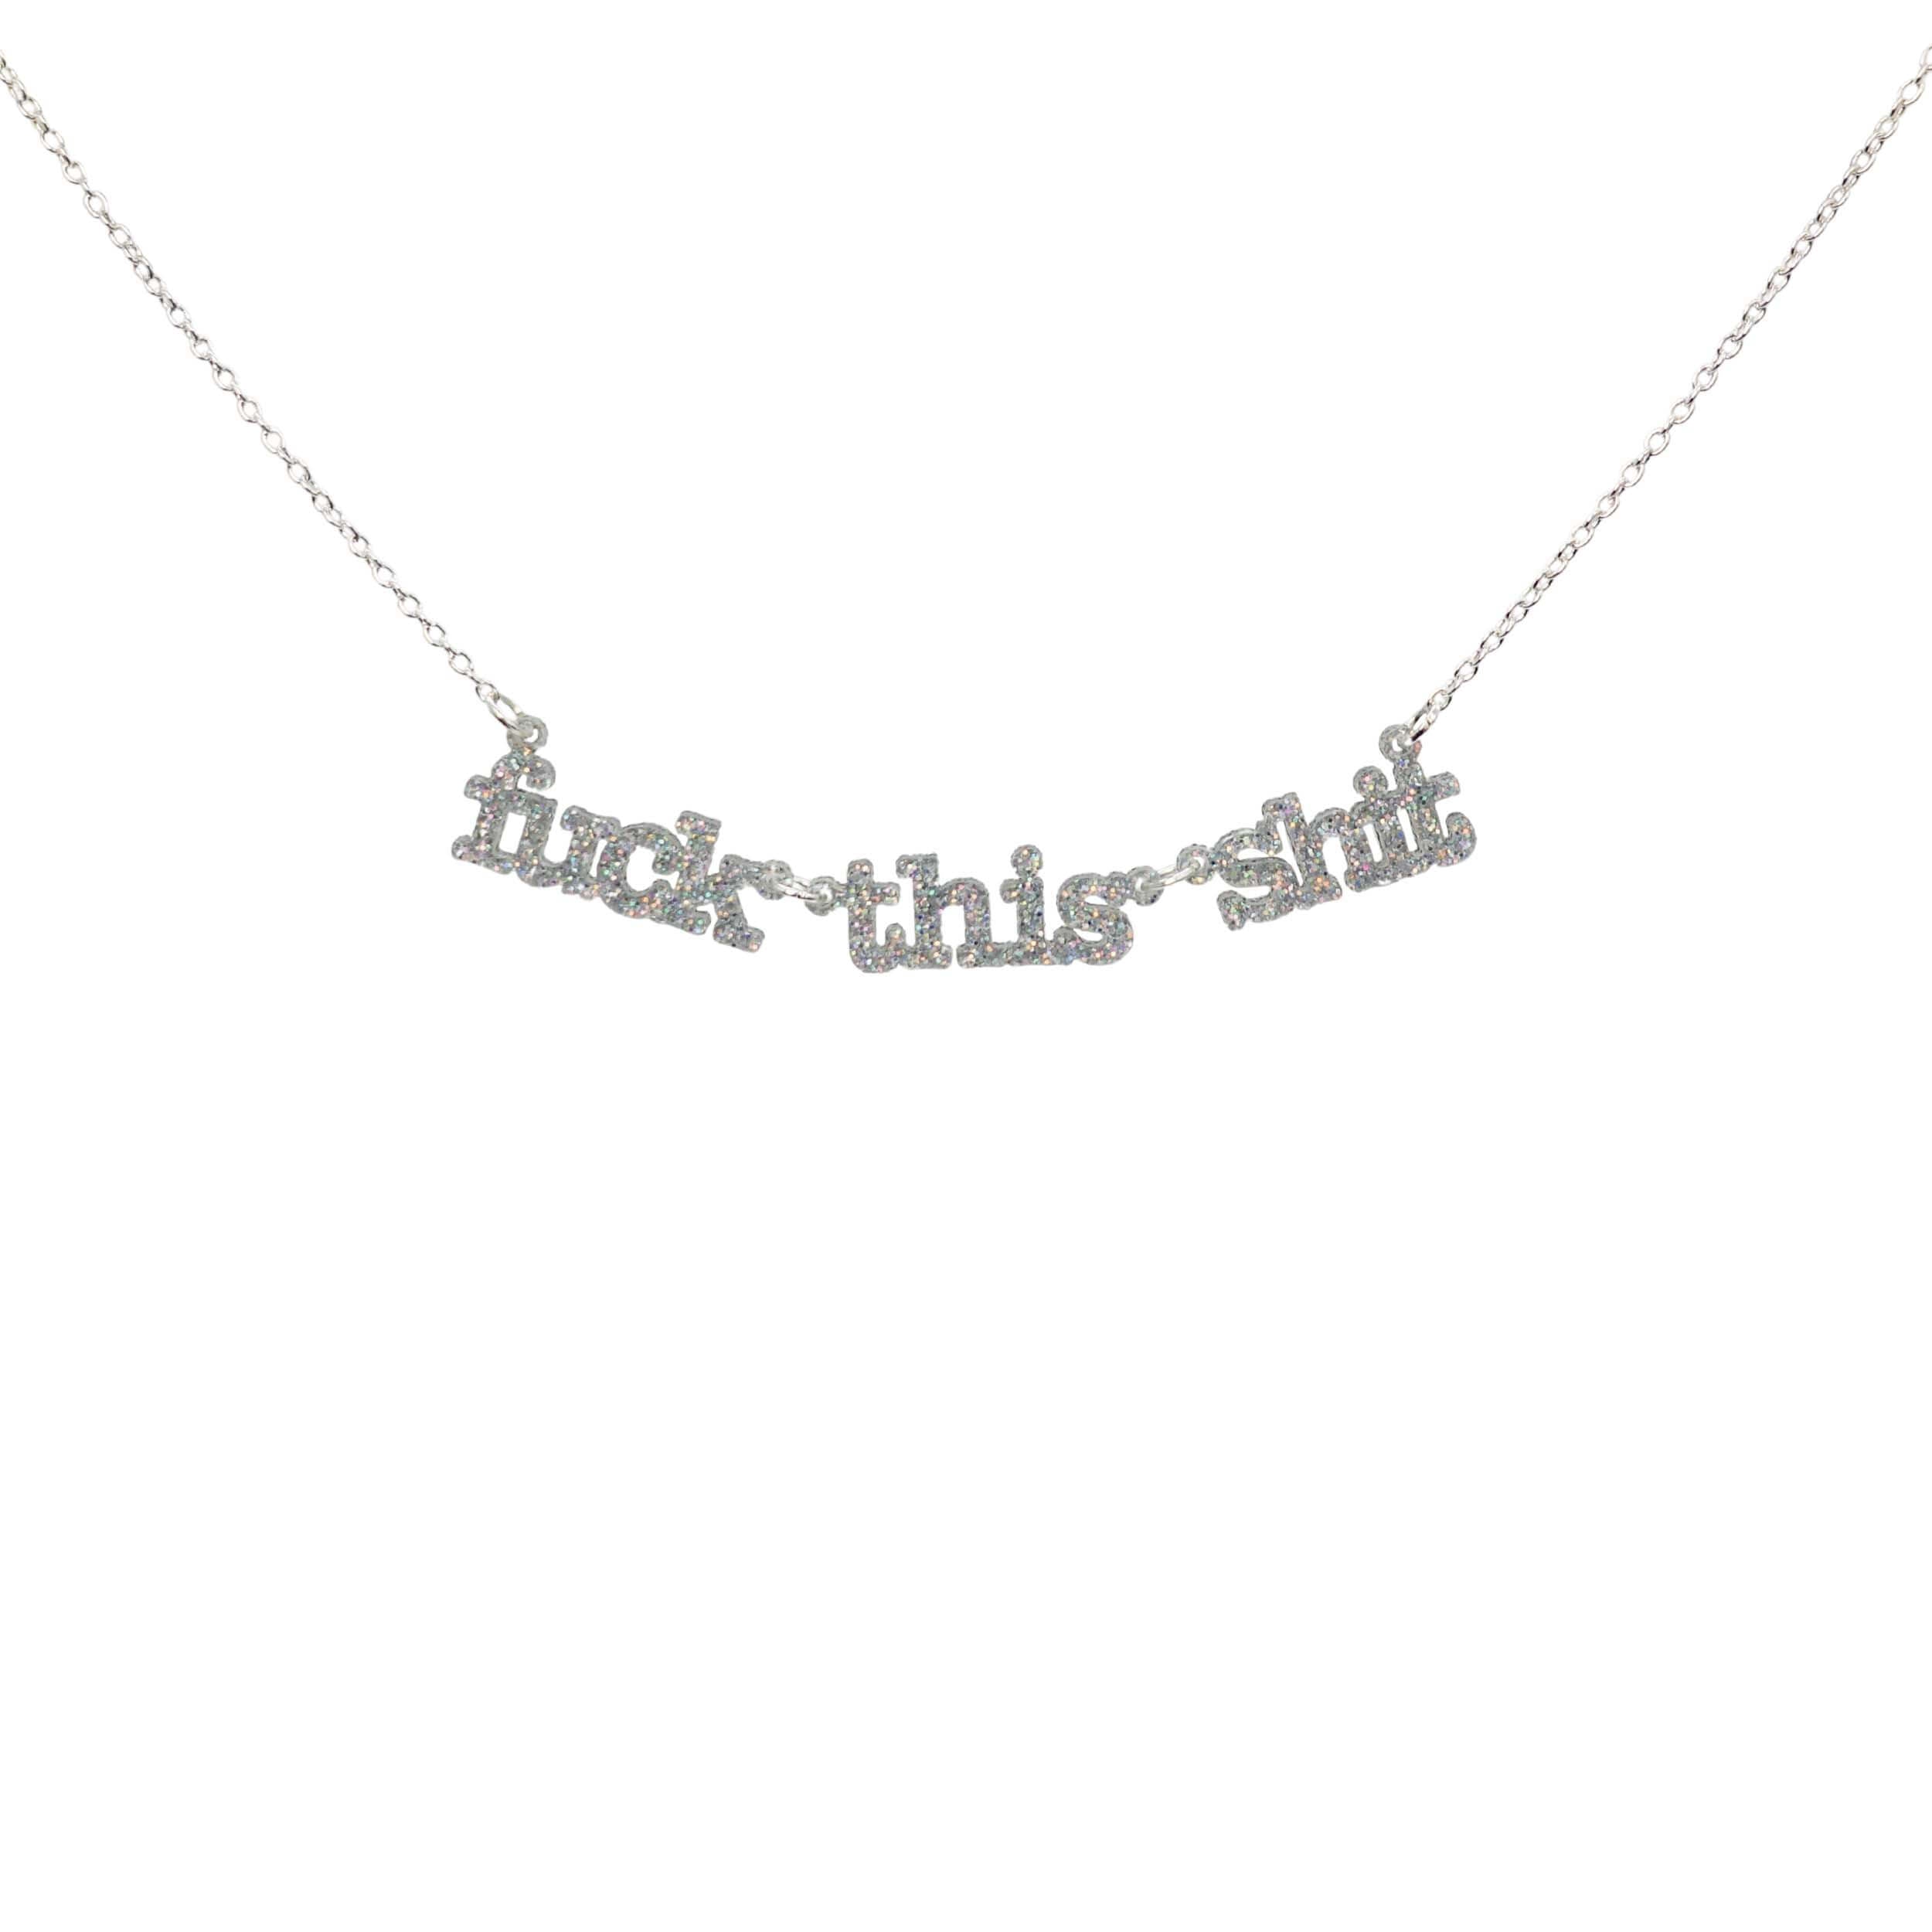 F*ck this sh*t necklace in silver glitter shown hanging against a white backround. 